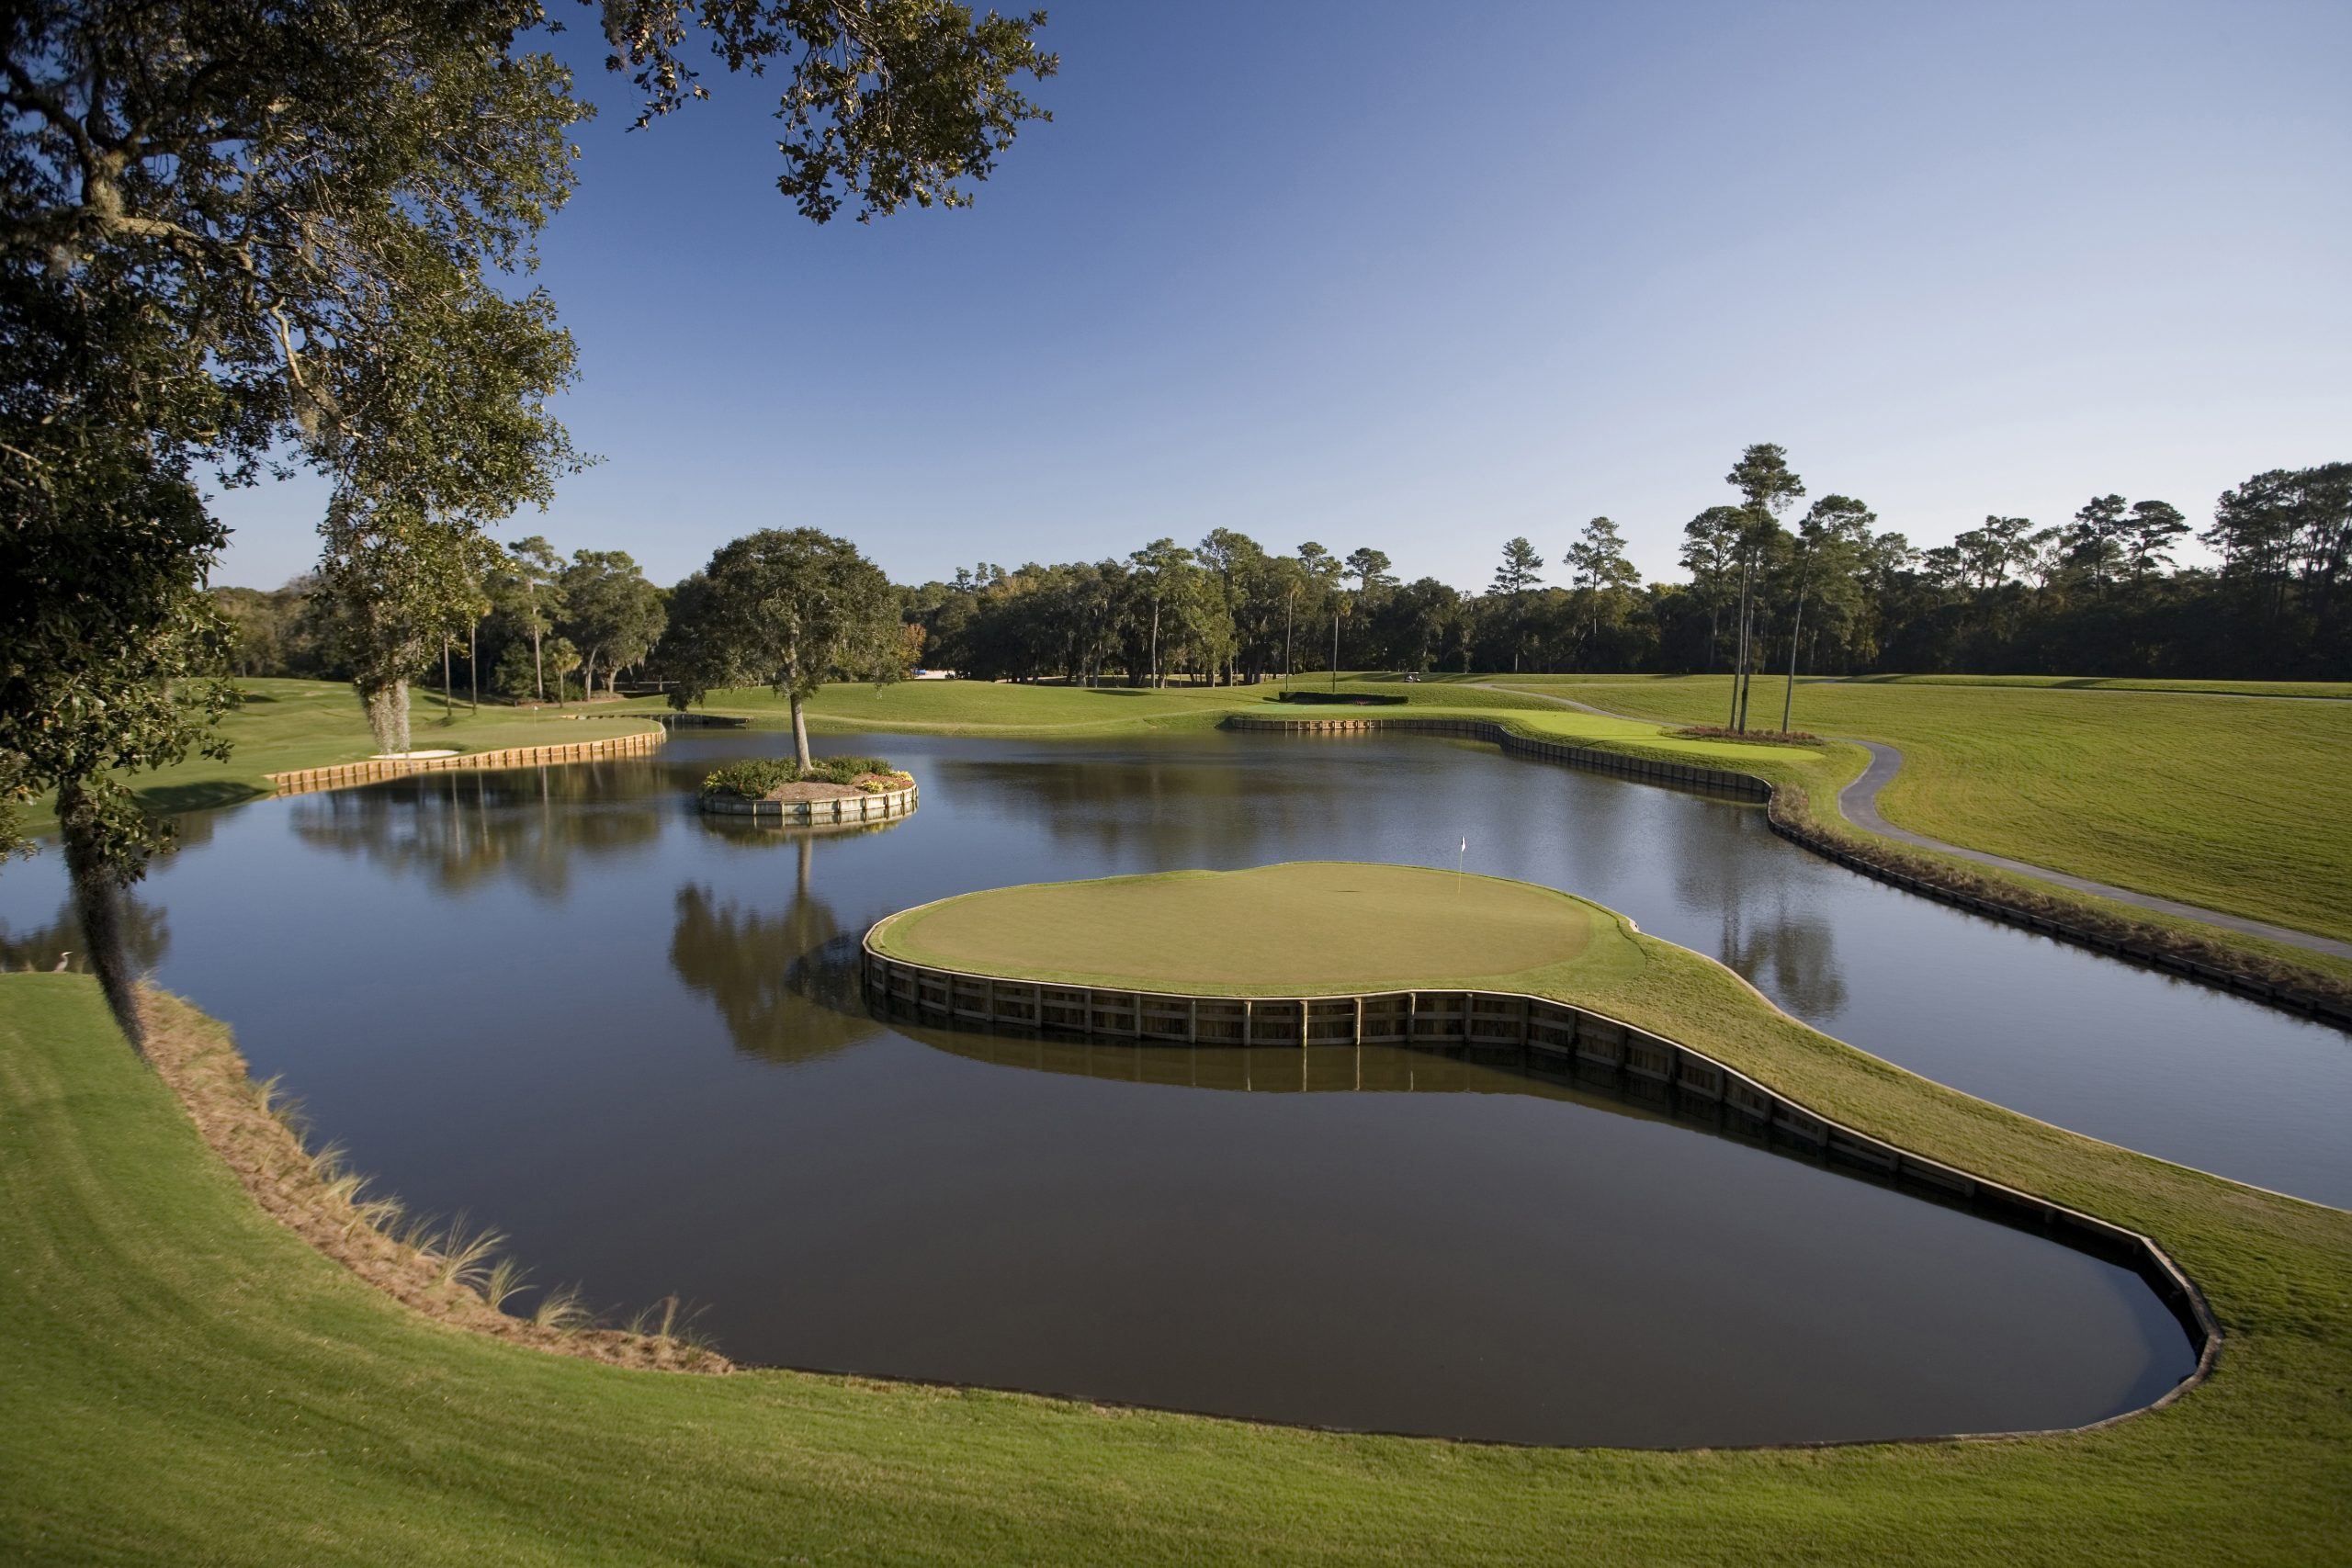 The iconic island green 17th Hole at TPC Sawgrass